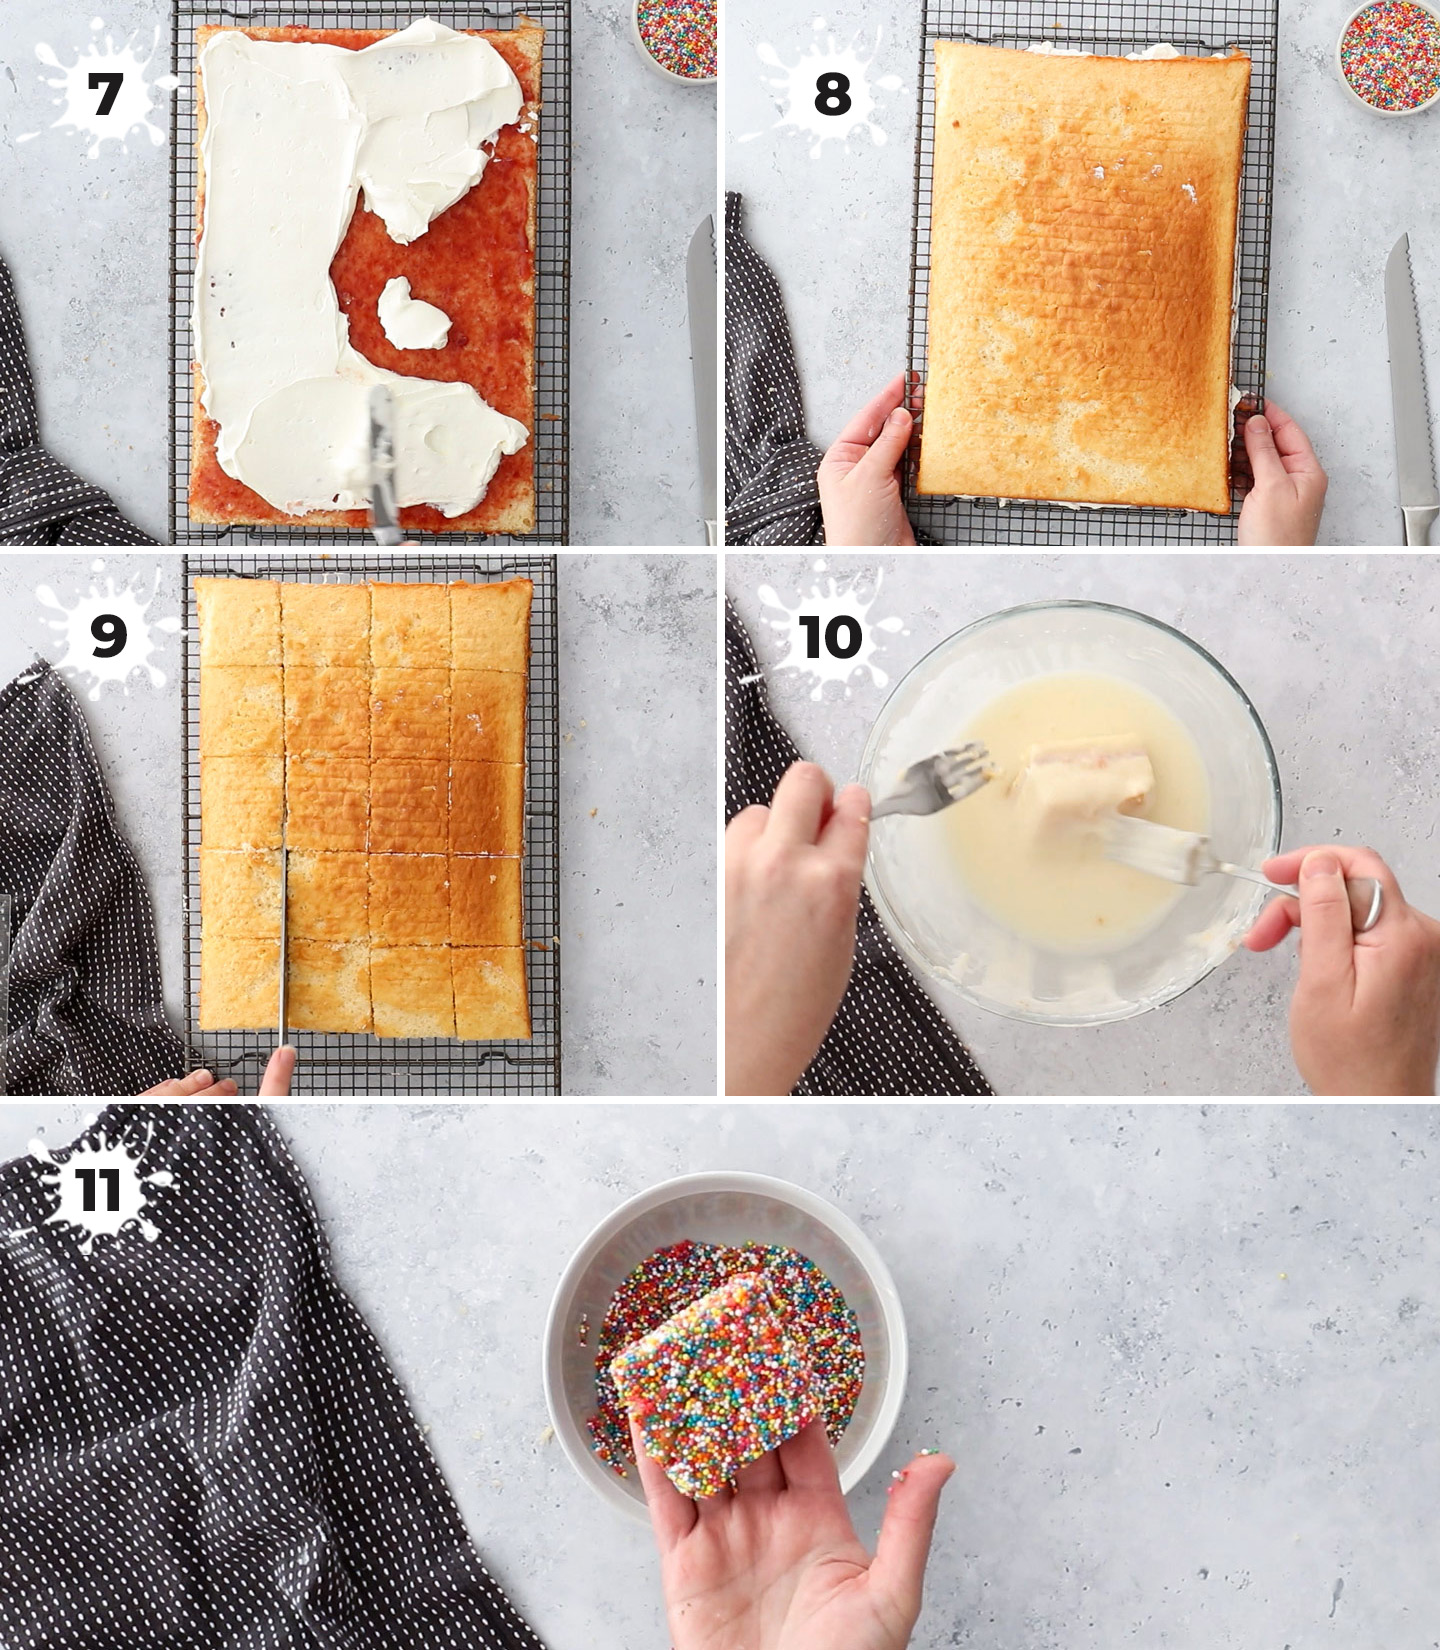 A collage showing how to fill and assemble the cakes.